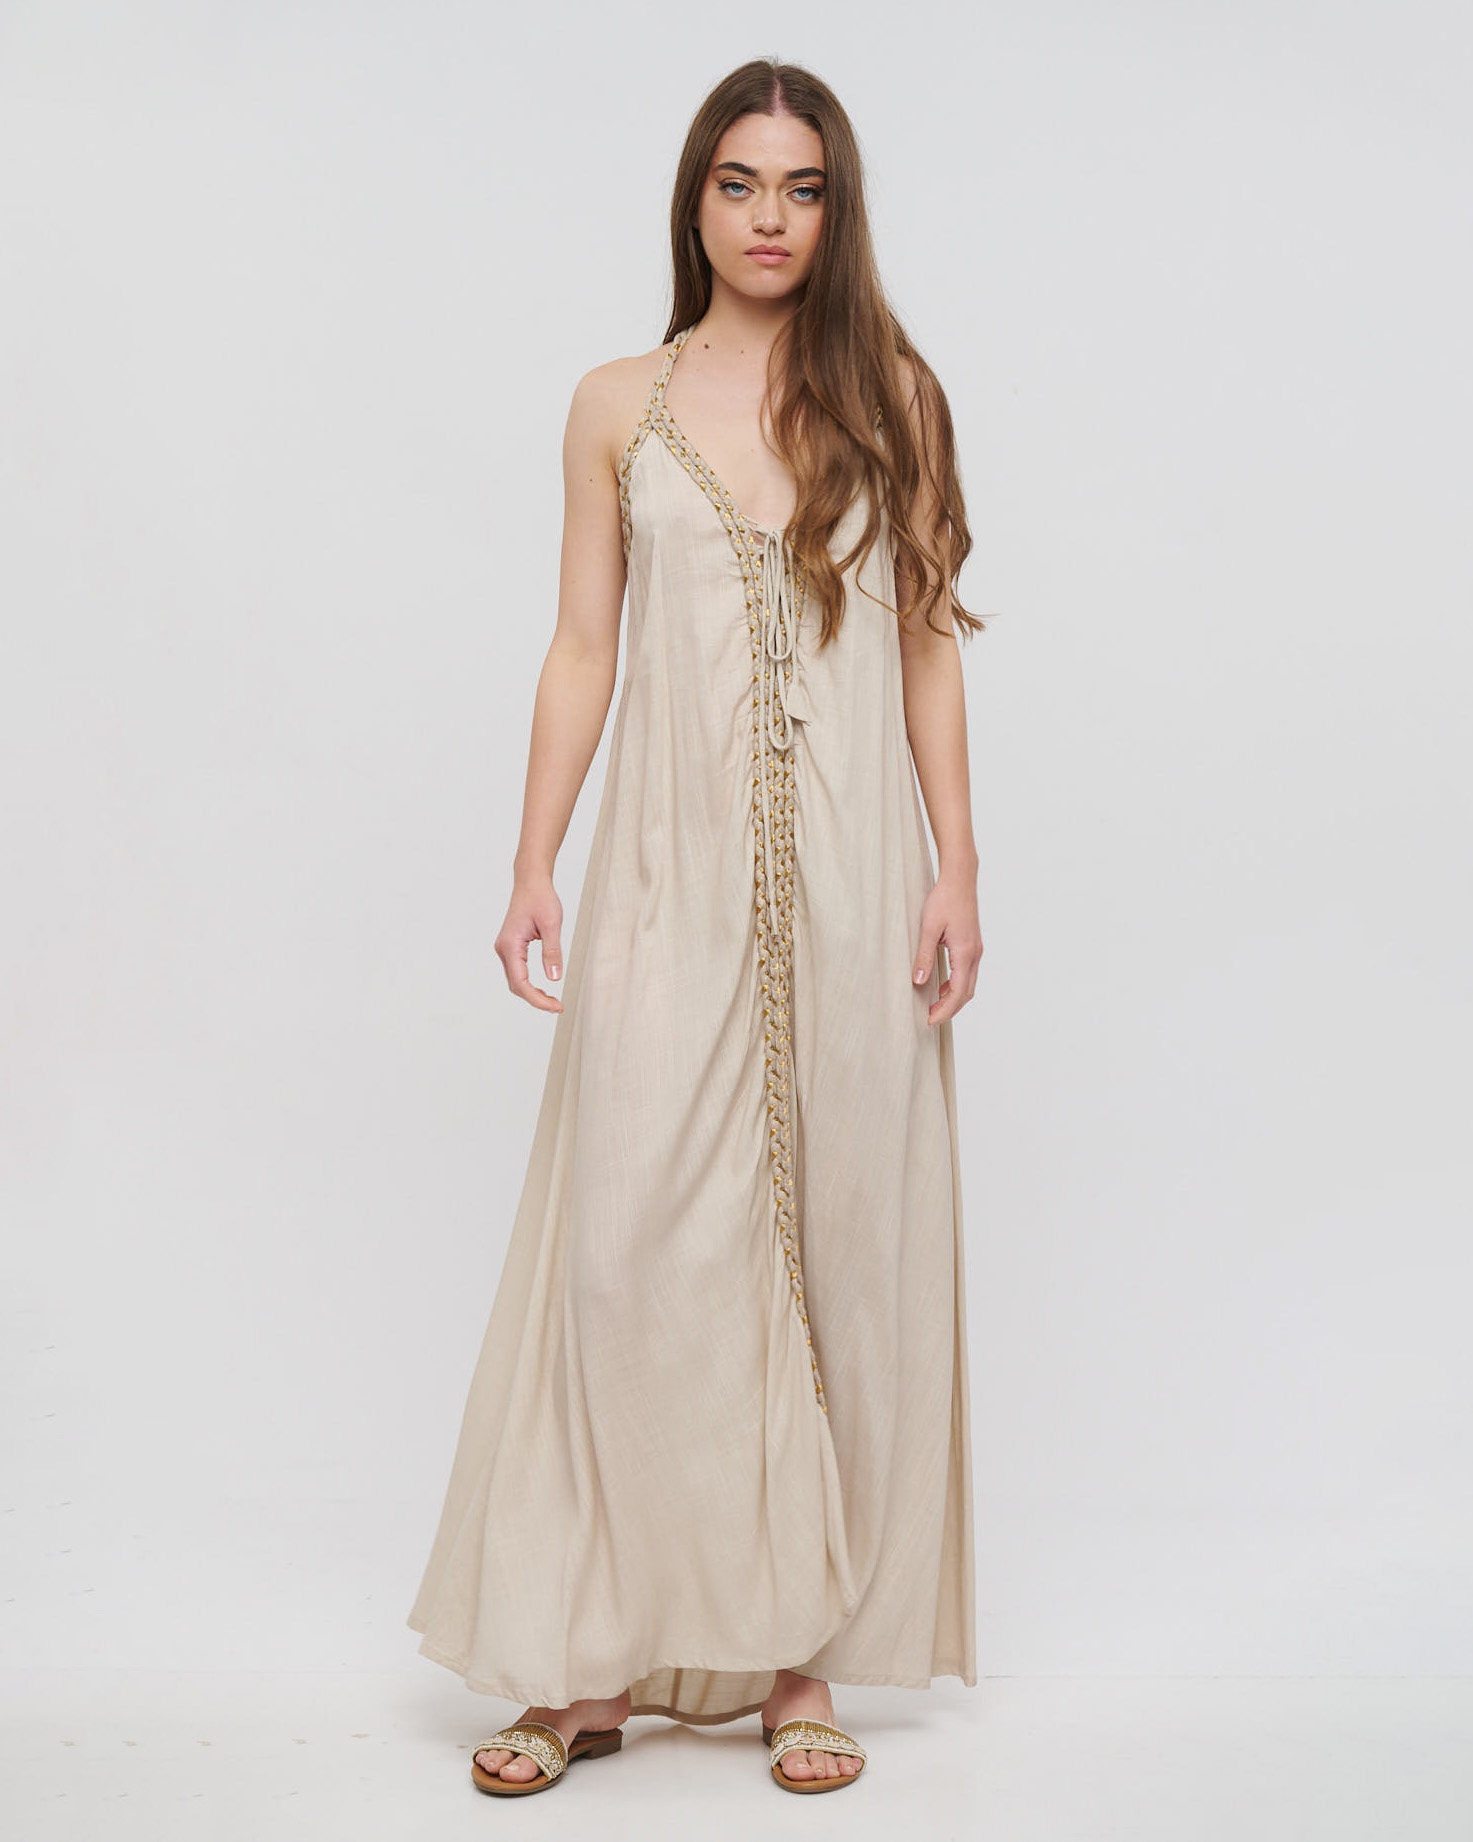 Wrap Dress With Golden Rope BLE RESORT COLLECTION